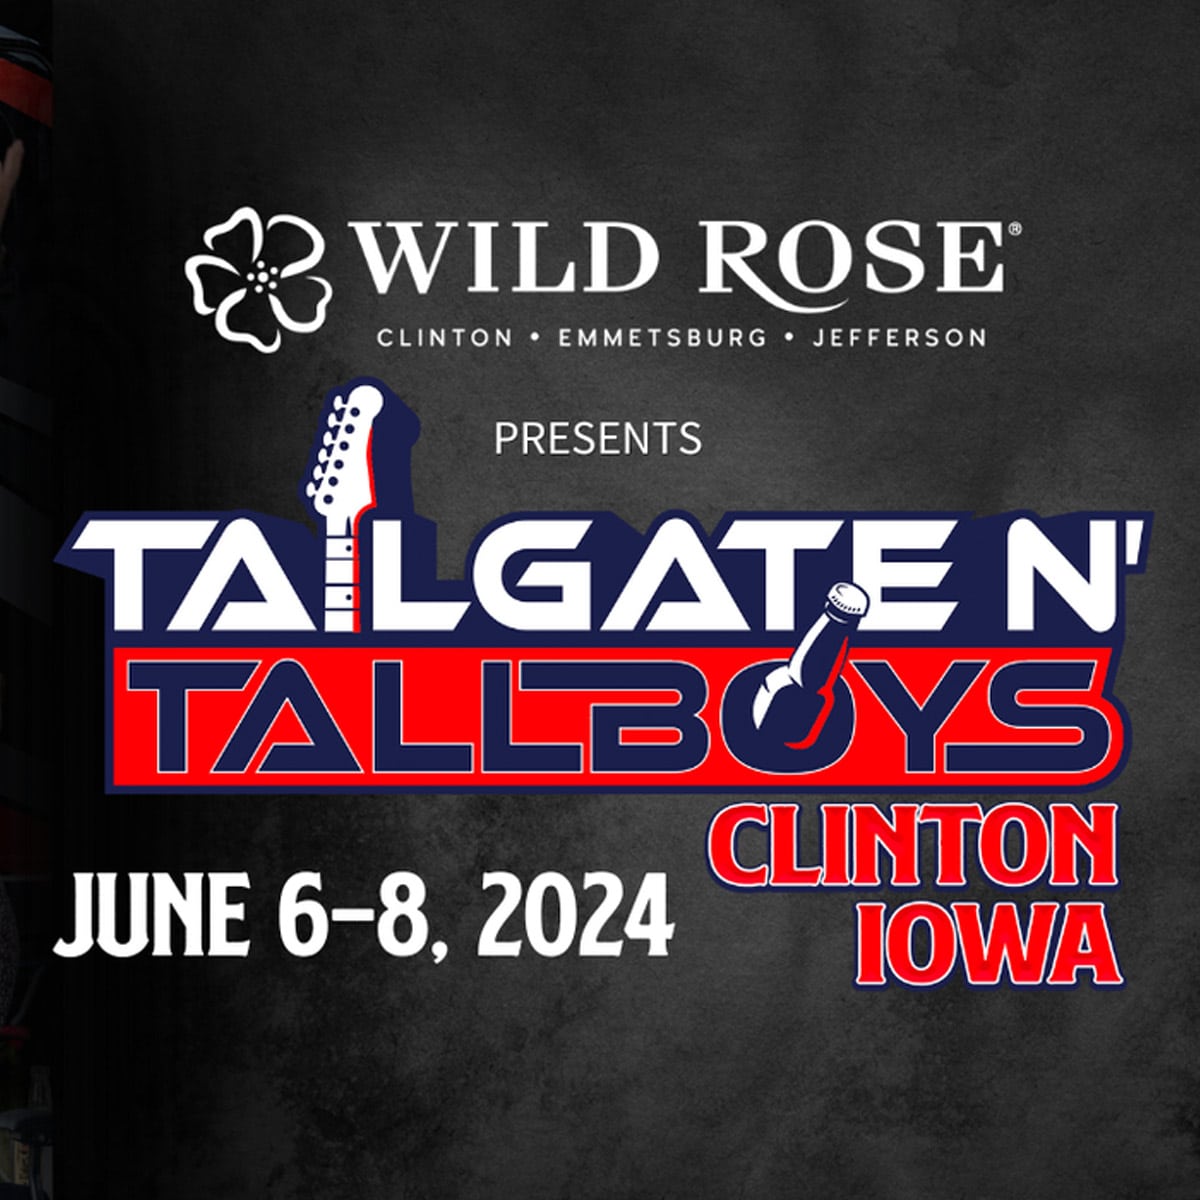 Tailgate N’ Tallboys Clinton 2024 ssquare